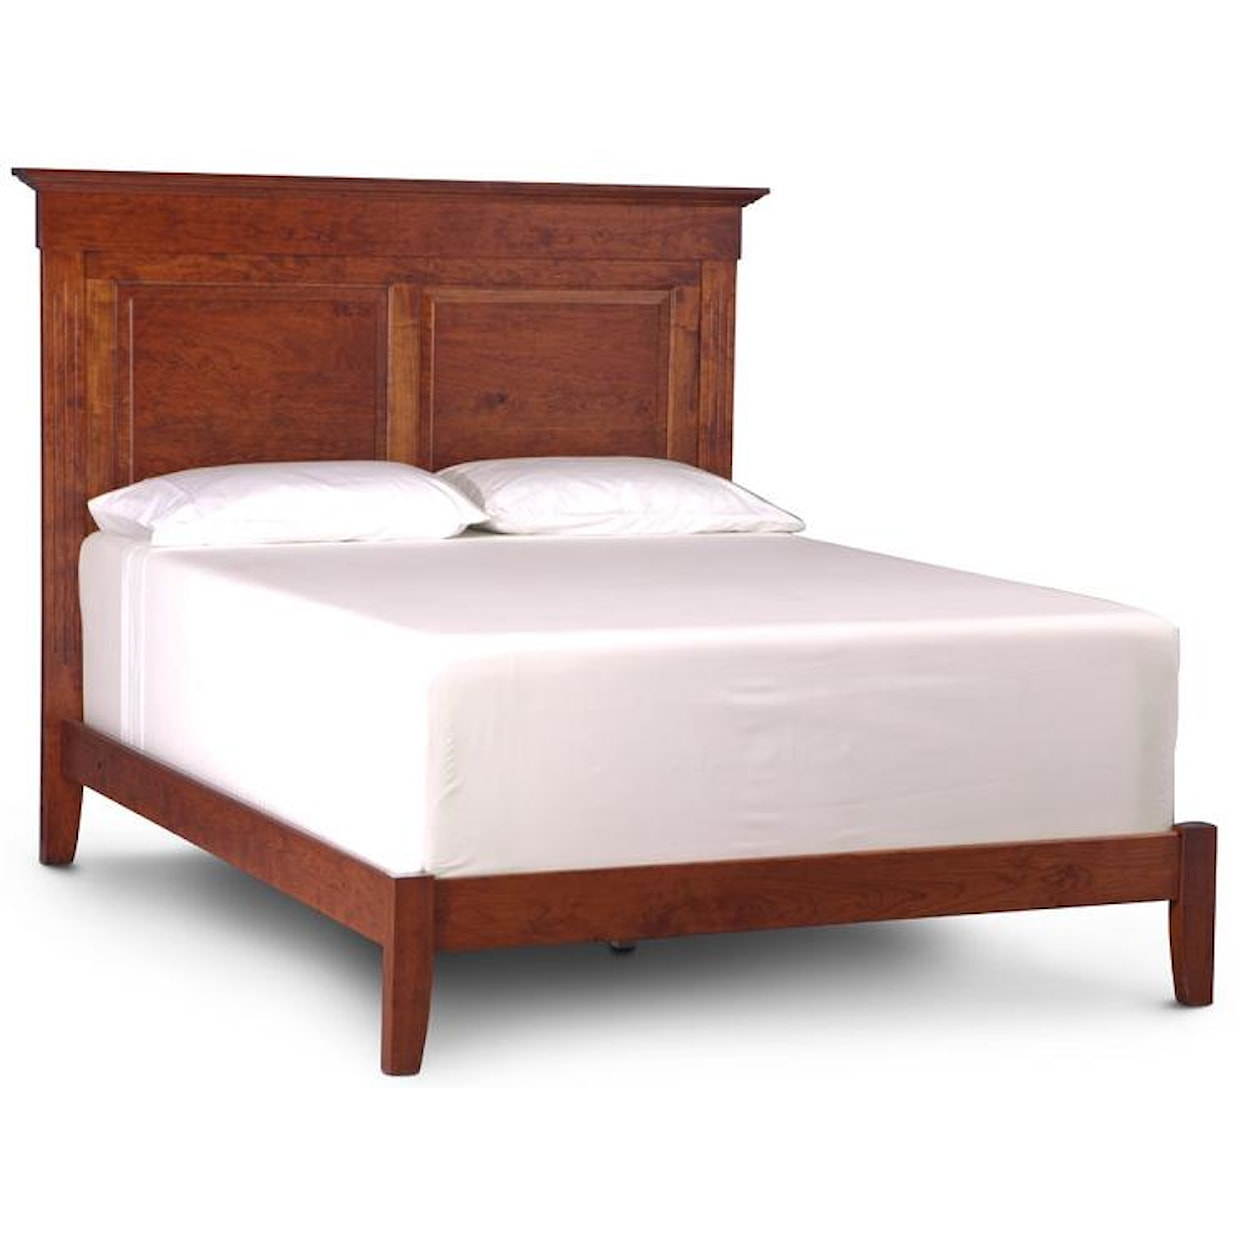 Simply Amish Express Twin Shenandoah Deluxe Bed with Wood Frame